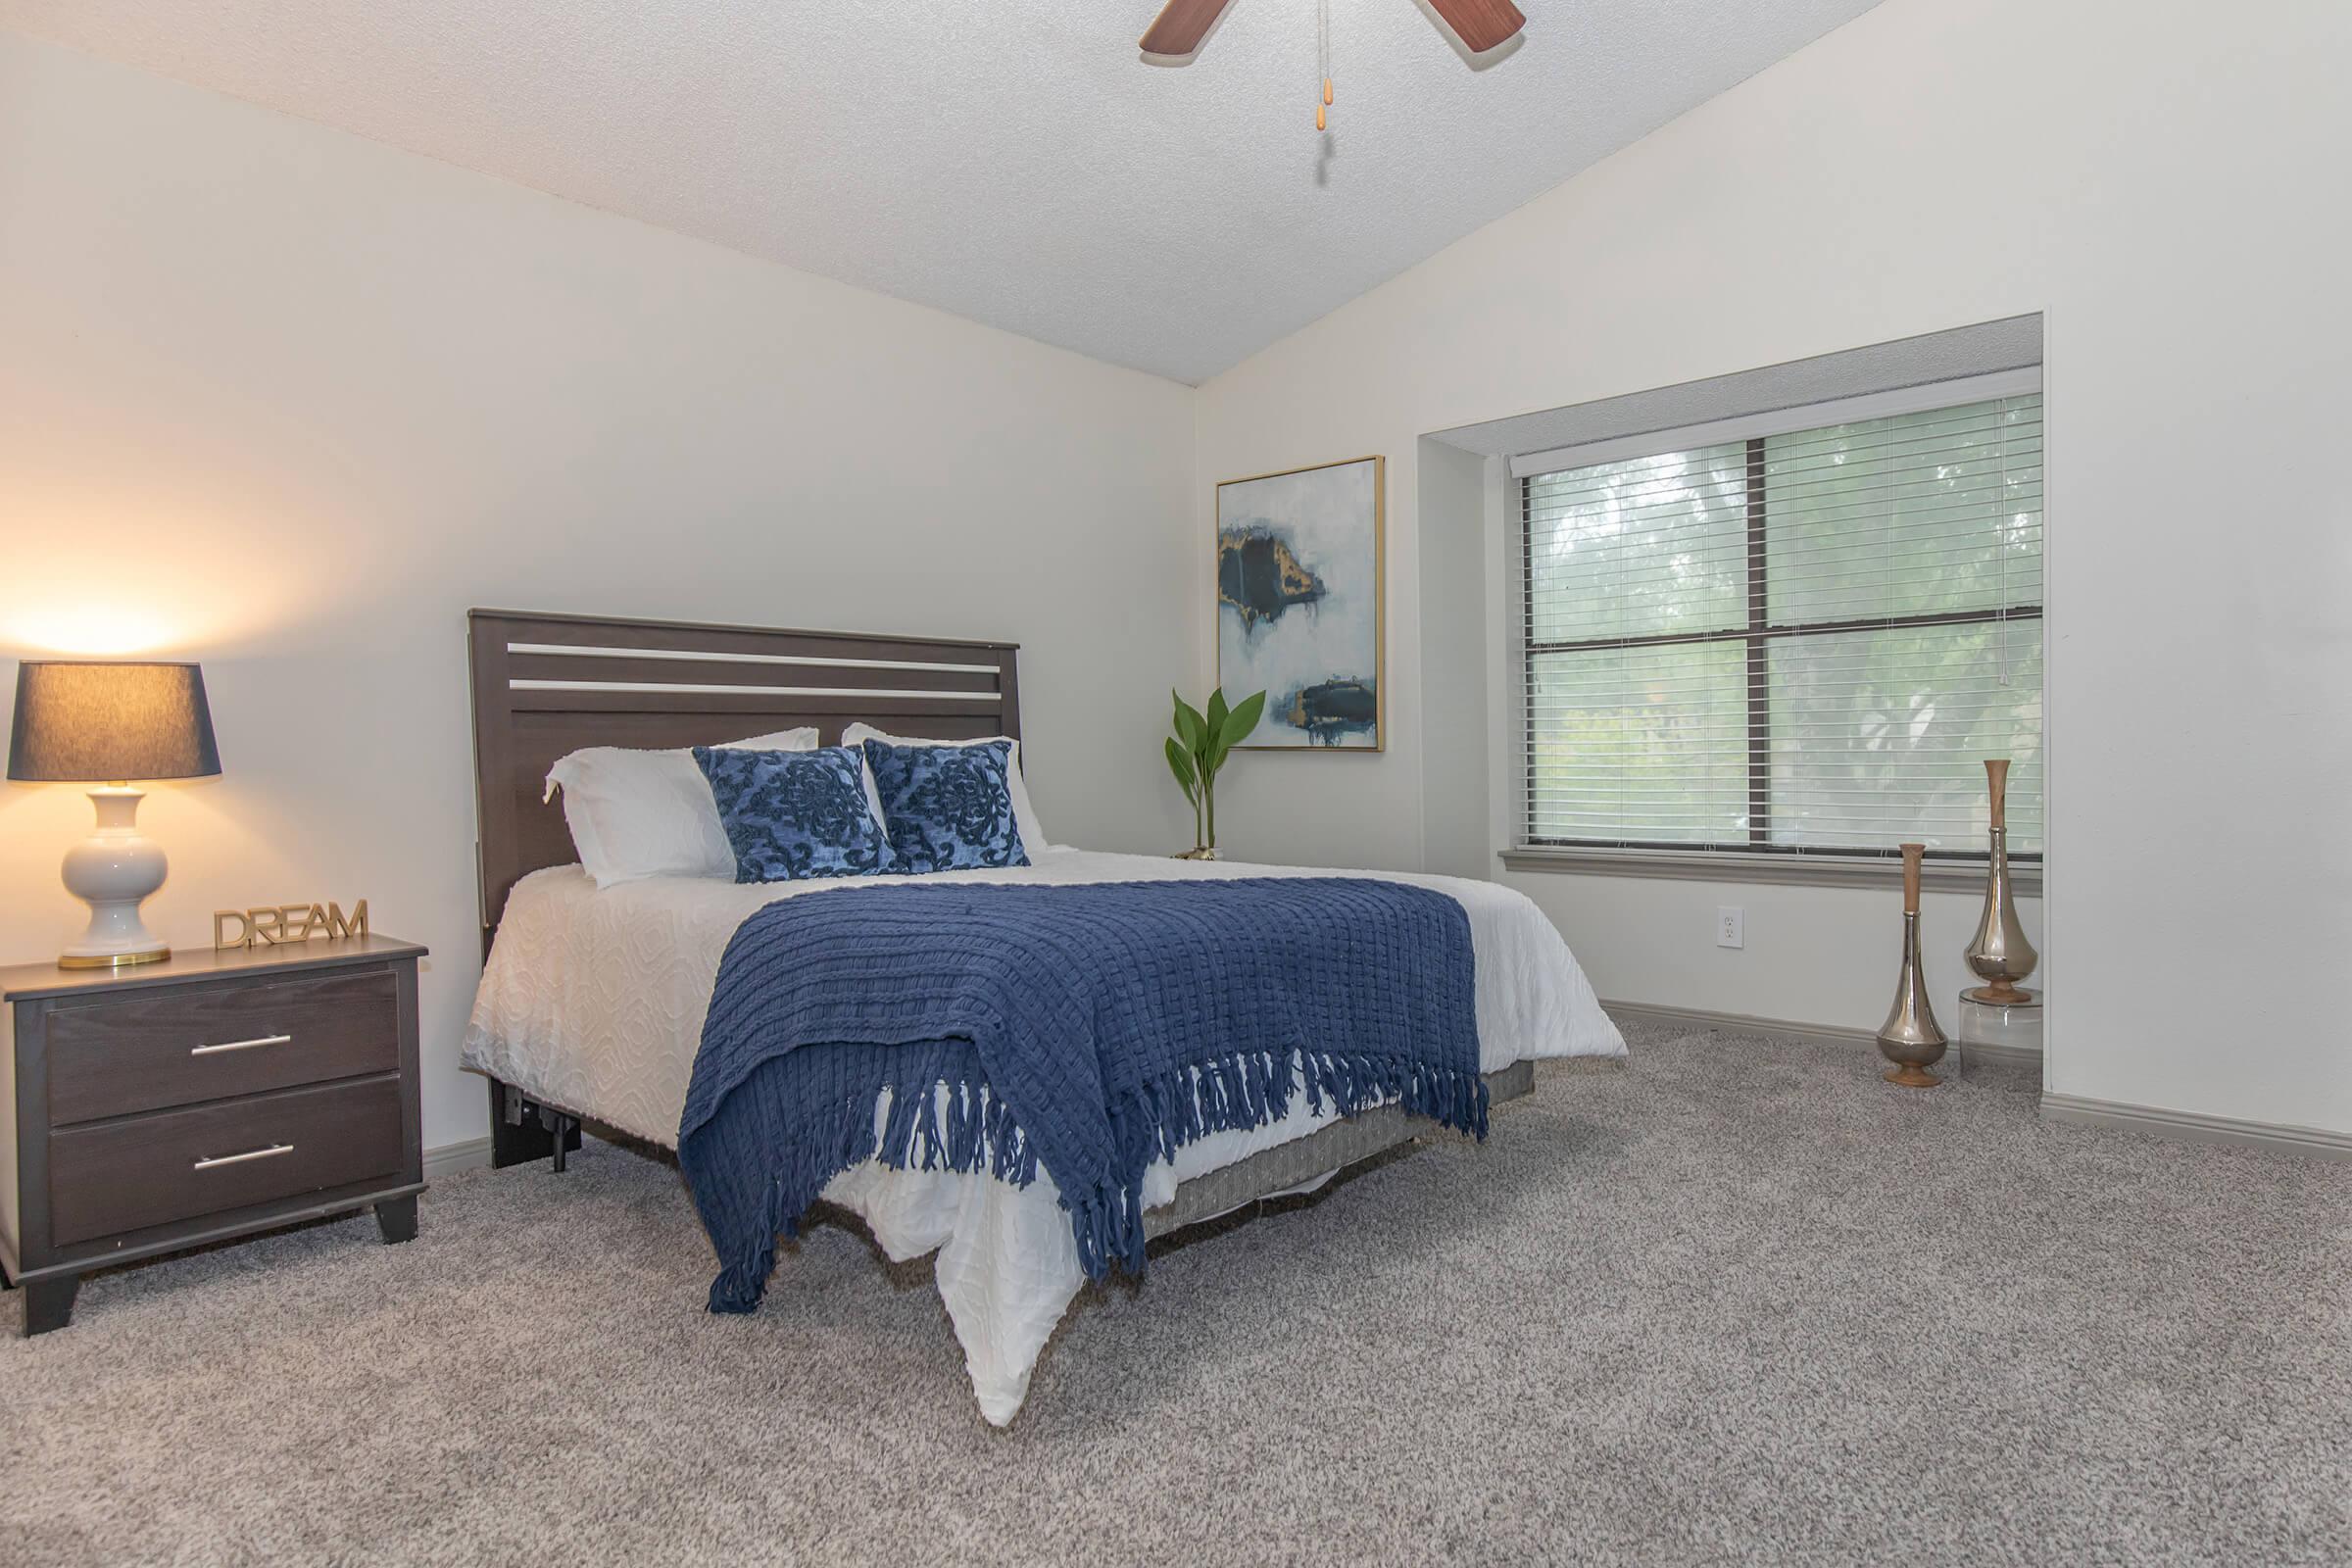 1 AND 2 BEDROOMS AVAILABLE FOR RENT IN SAN ANTONIO, TX